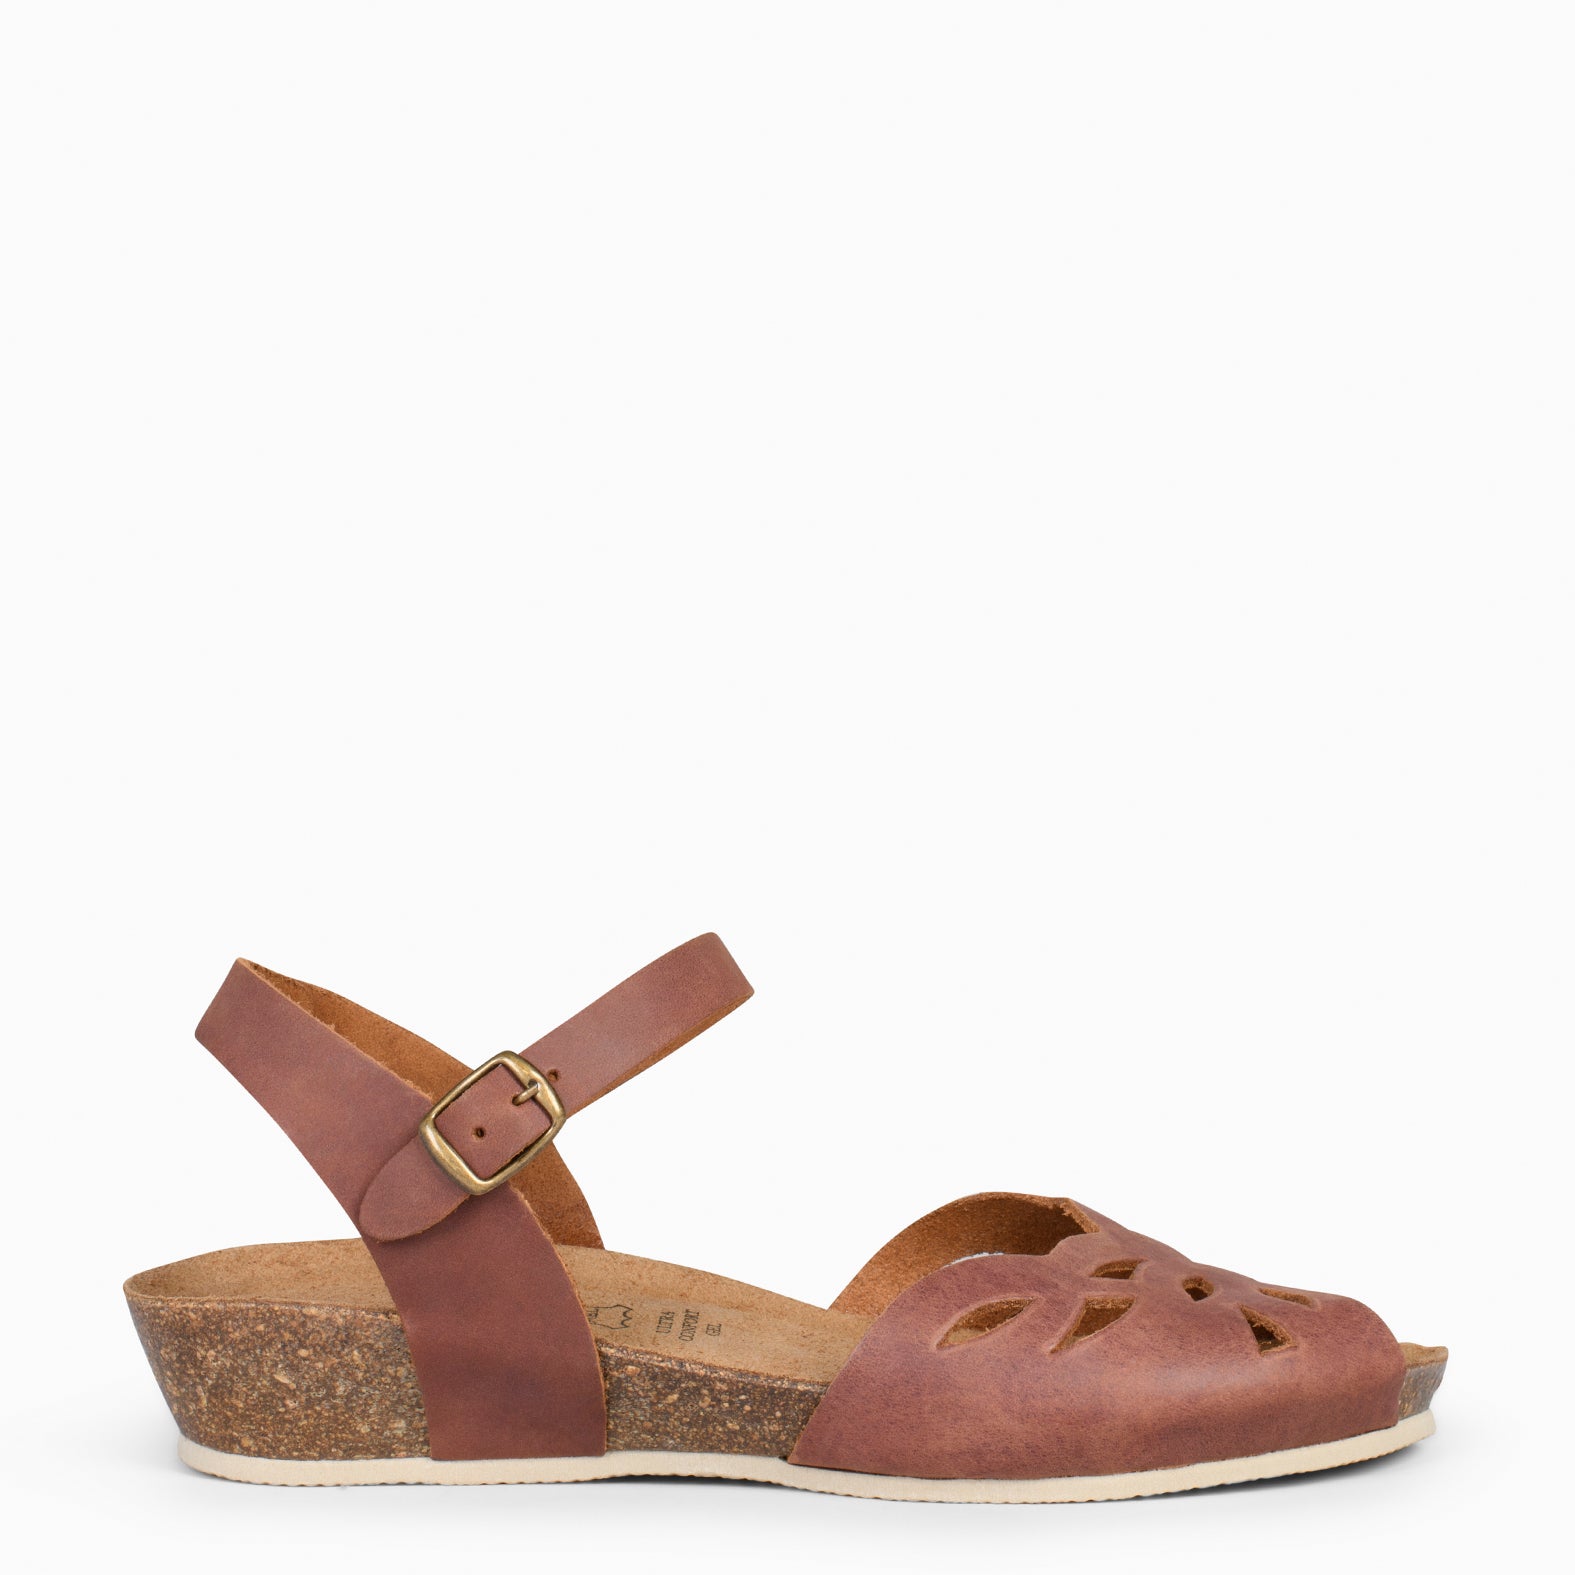 ALOE – CAMEL BIO sandals with wedge